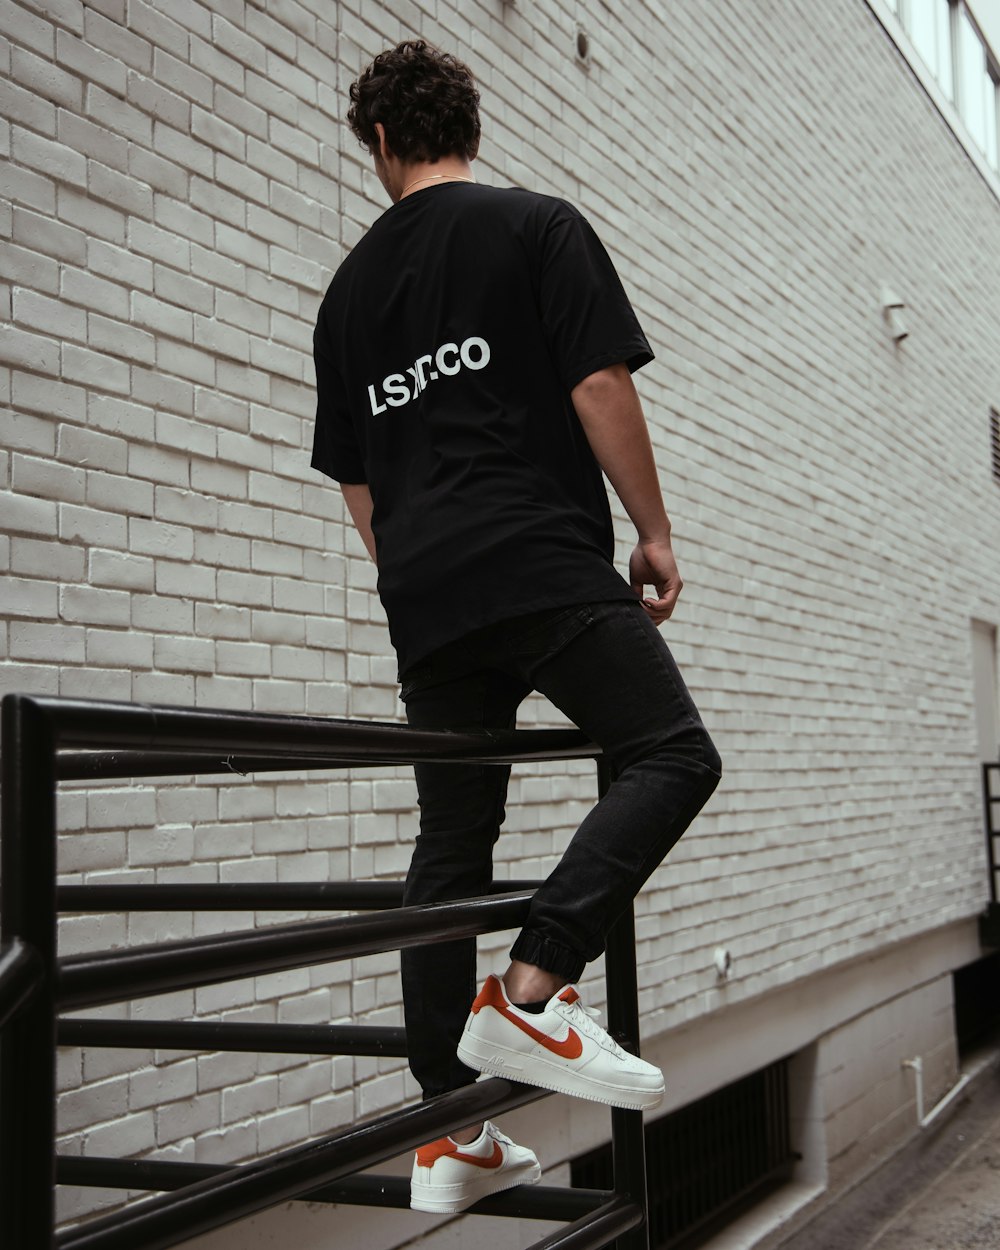 man in black and white adidas t-shirt and black pants wearing white nike  sneakers photo – Free Clothing Image on Unsplash